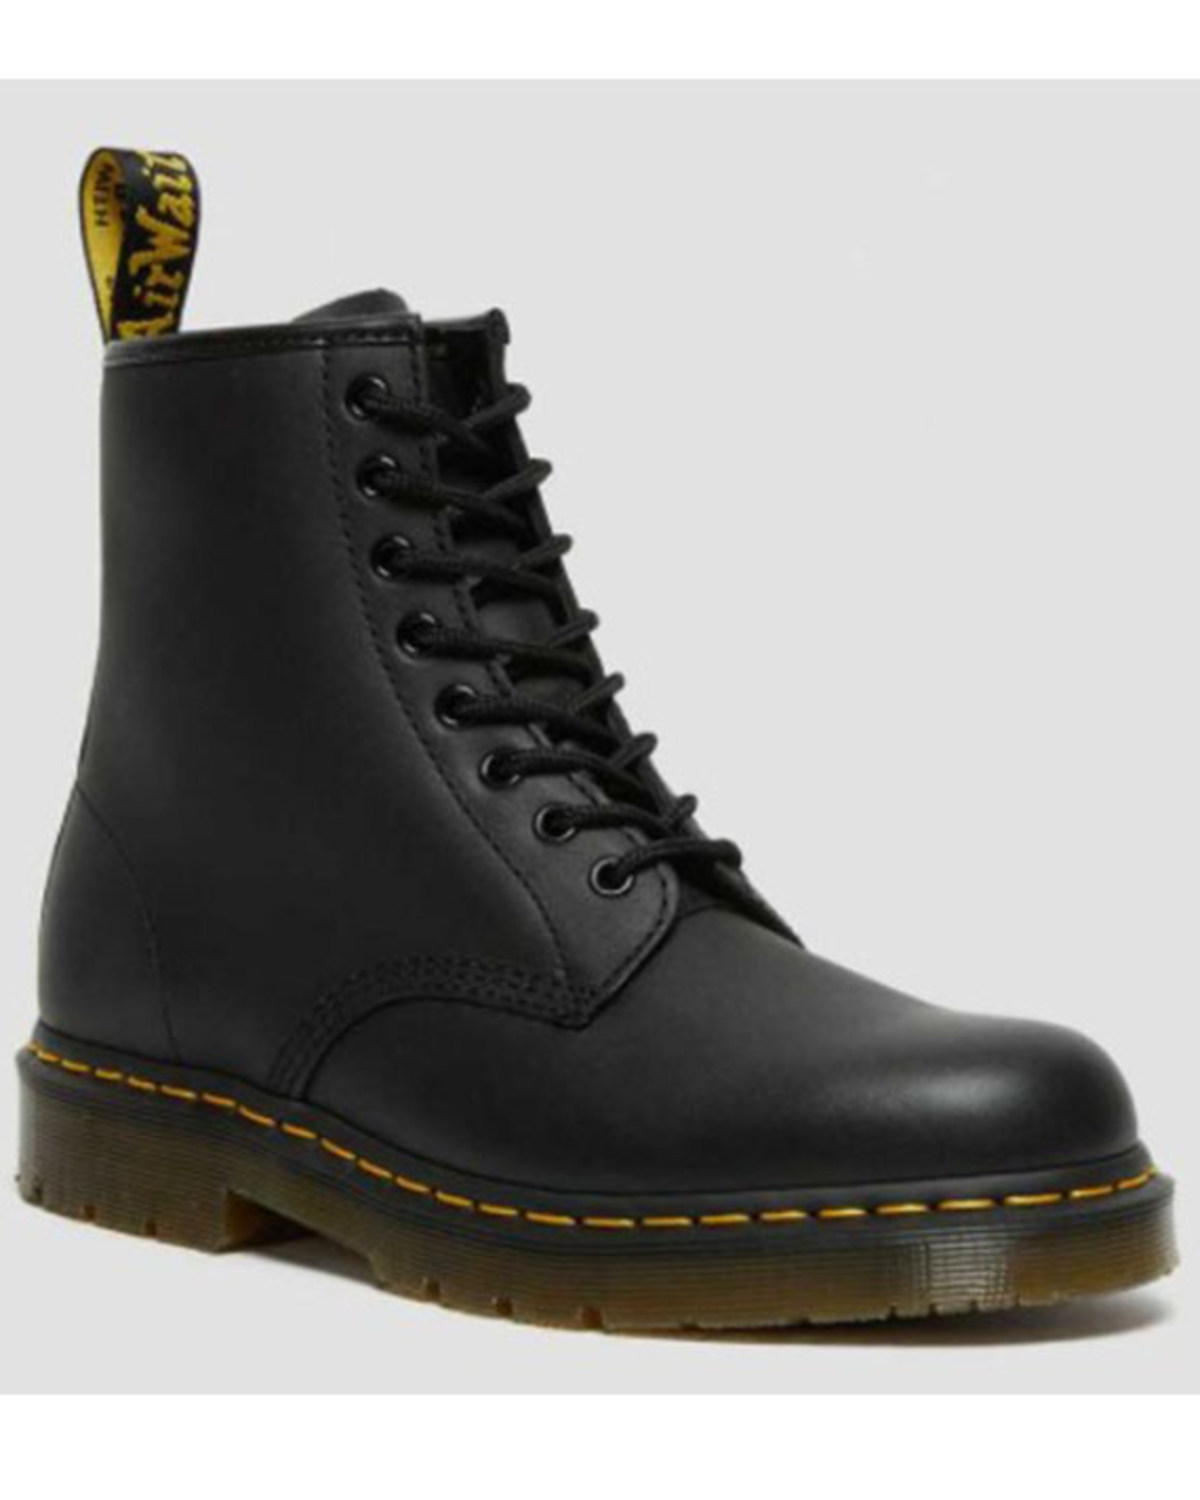 Dr. Martens 1460 Industrial Lace-Up Boots - Round Toe